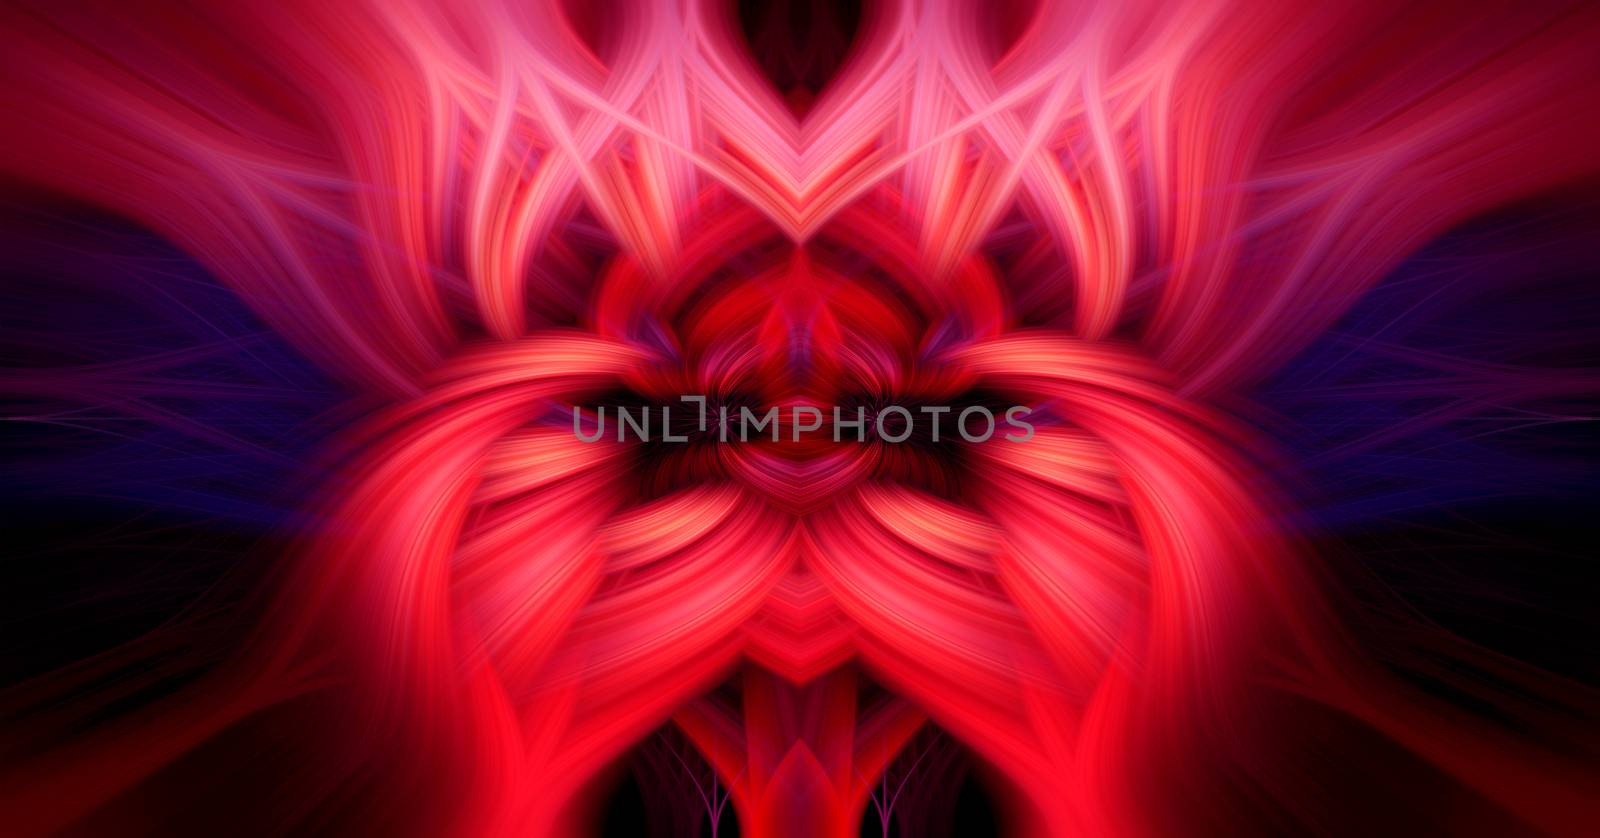 Beautiful abstract intertwined 3d fibers forming a shape of sparkle, flame, flower, interlinked hearts or alien creature looking like a spider. Red, blue, maroon, and purple colors. Illustration.